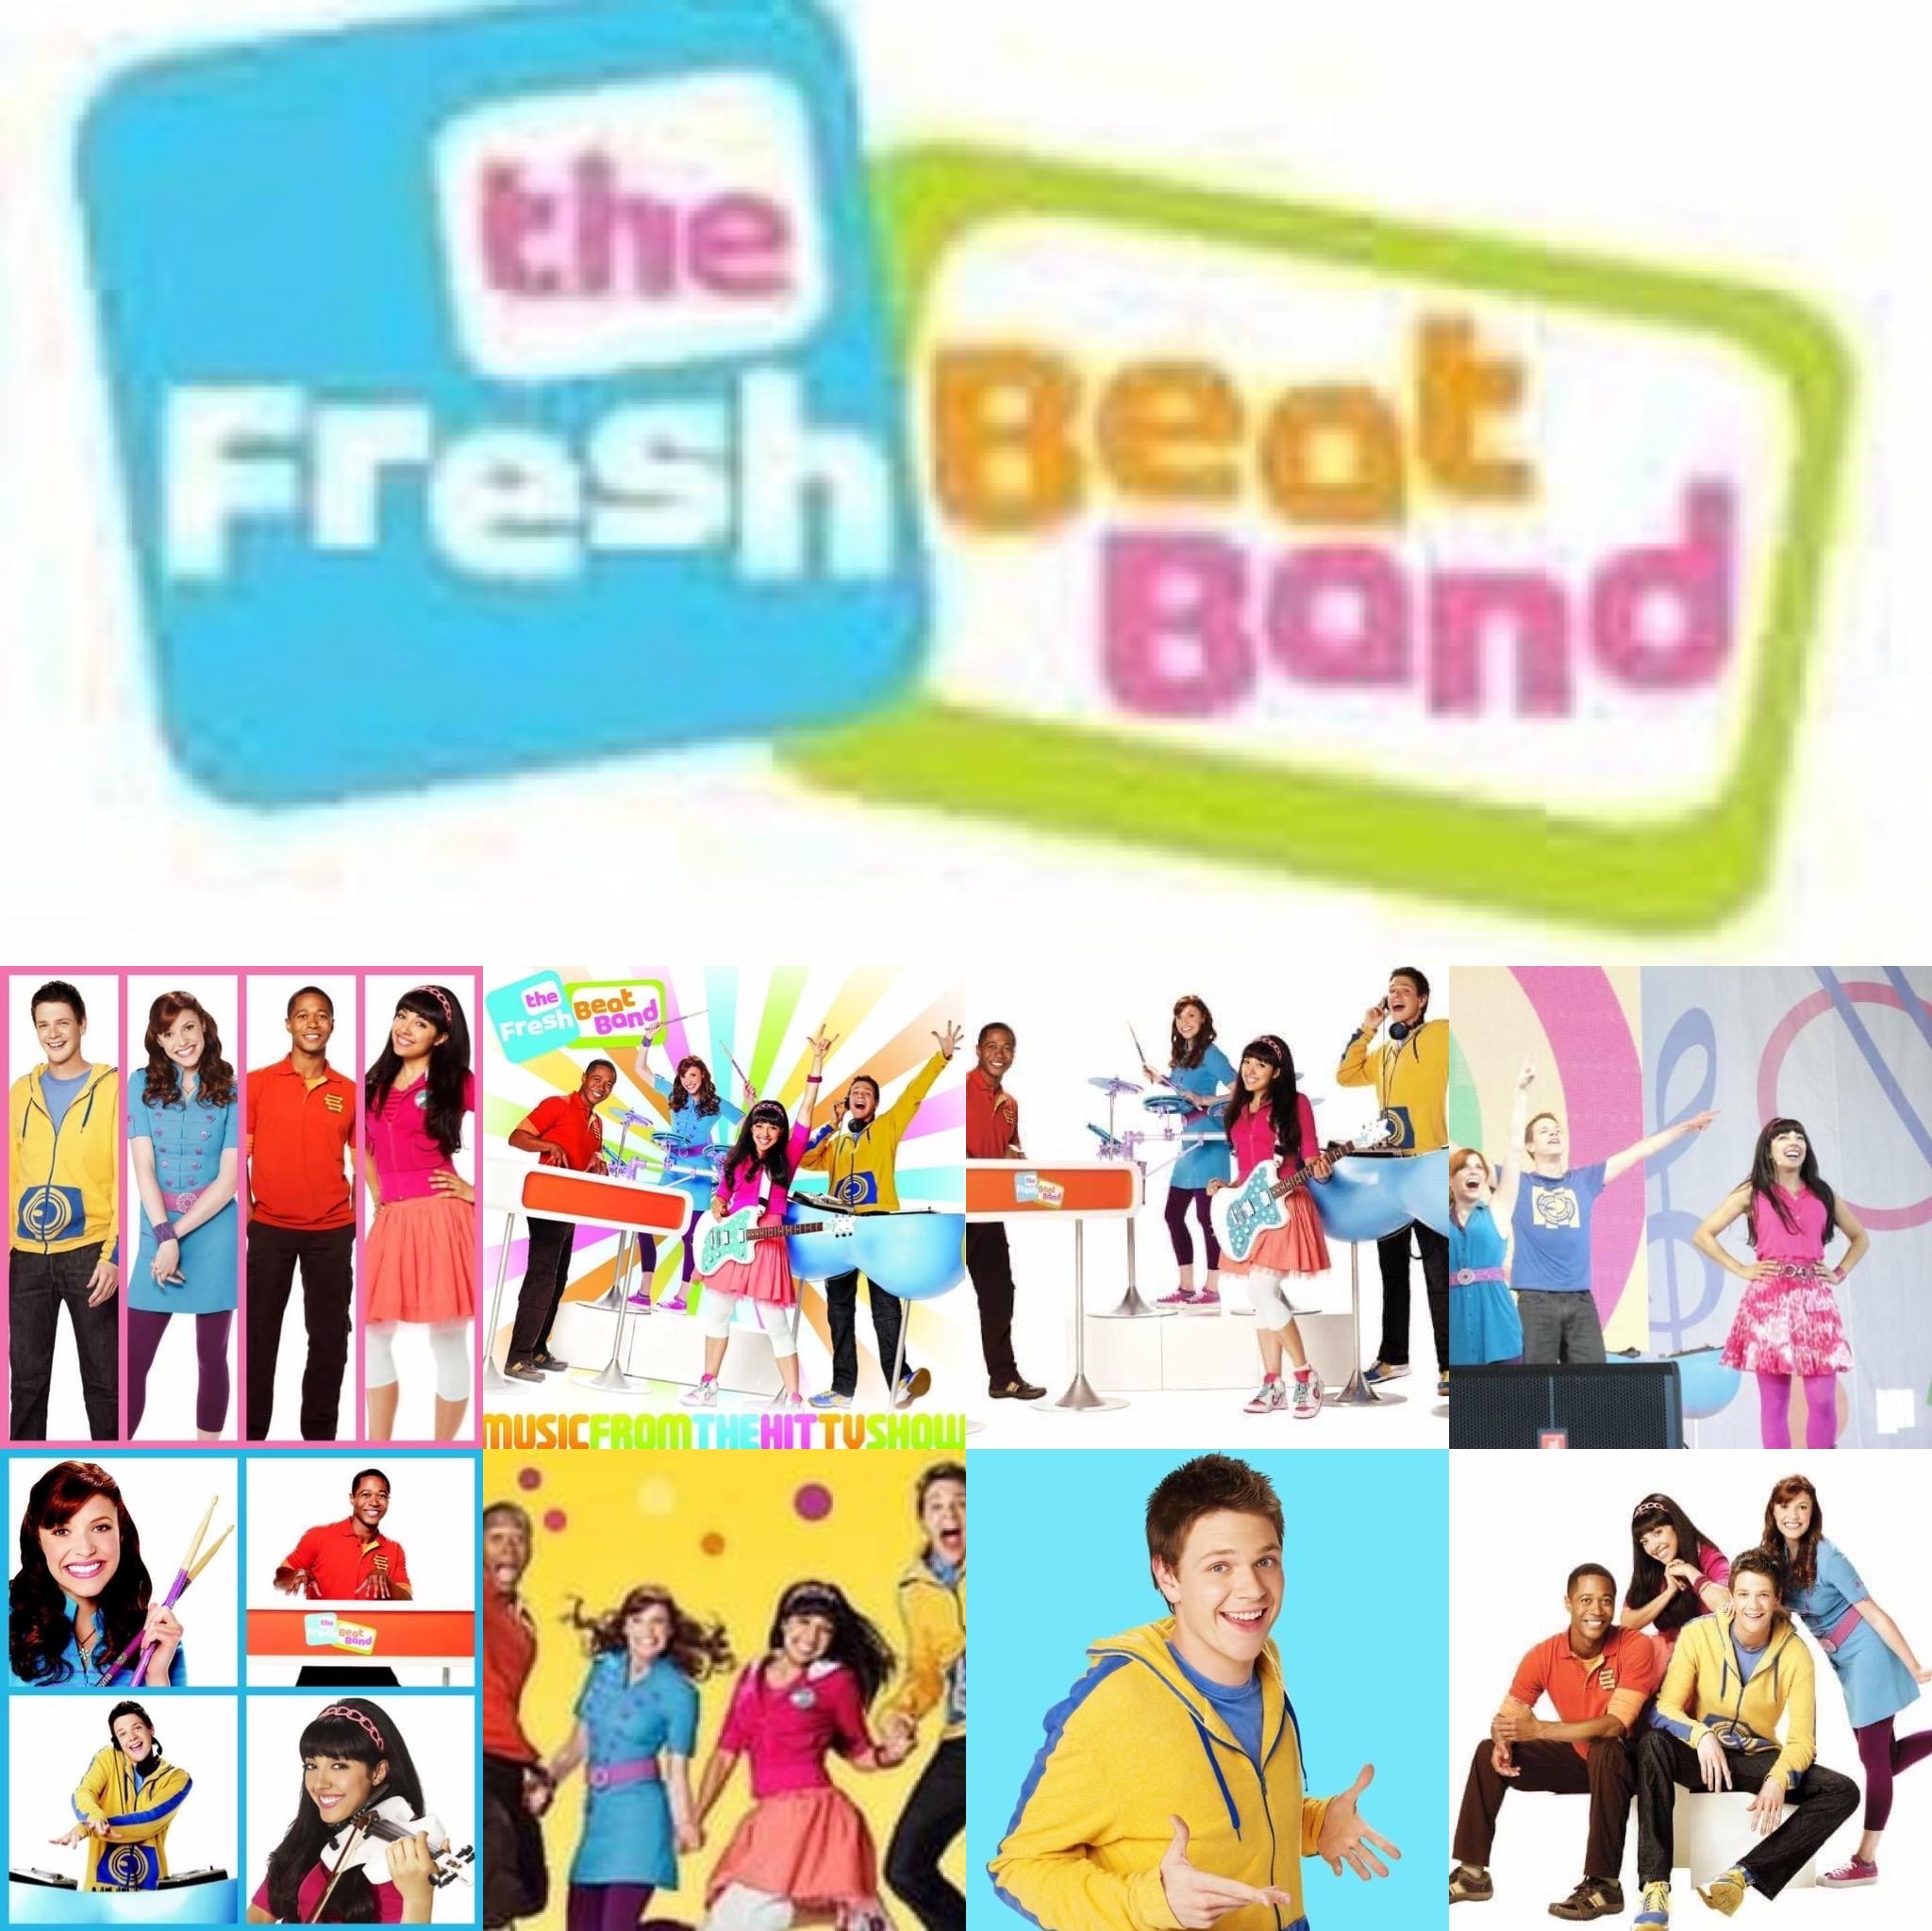 The fresh beat band collage by pinkzeo1 on